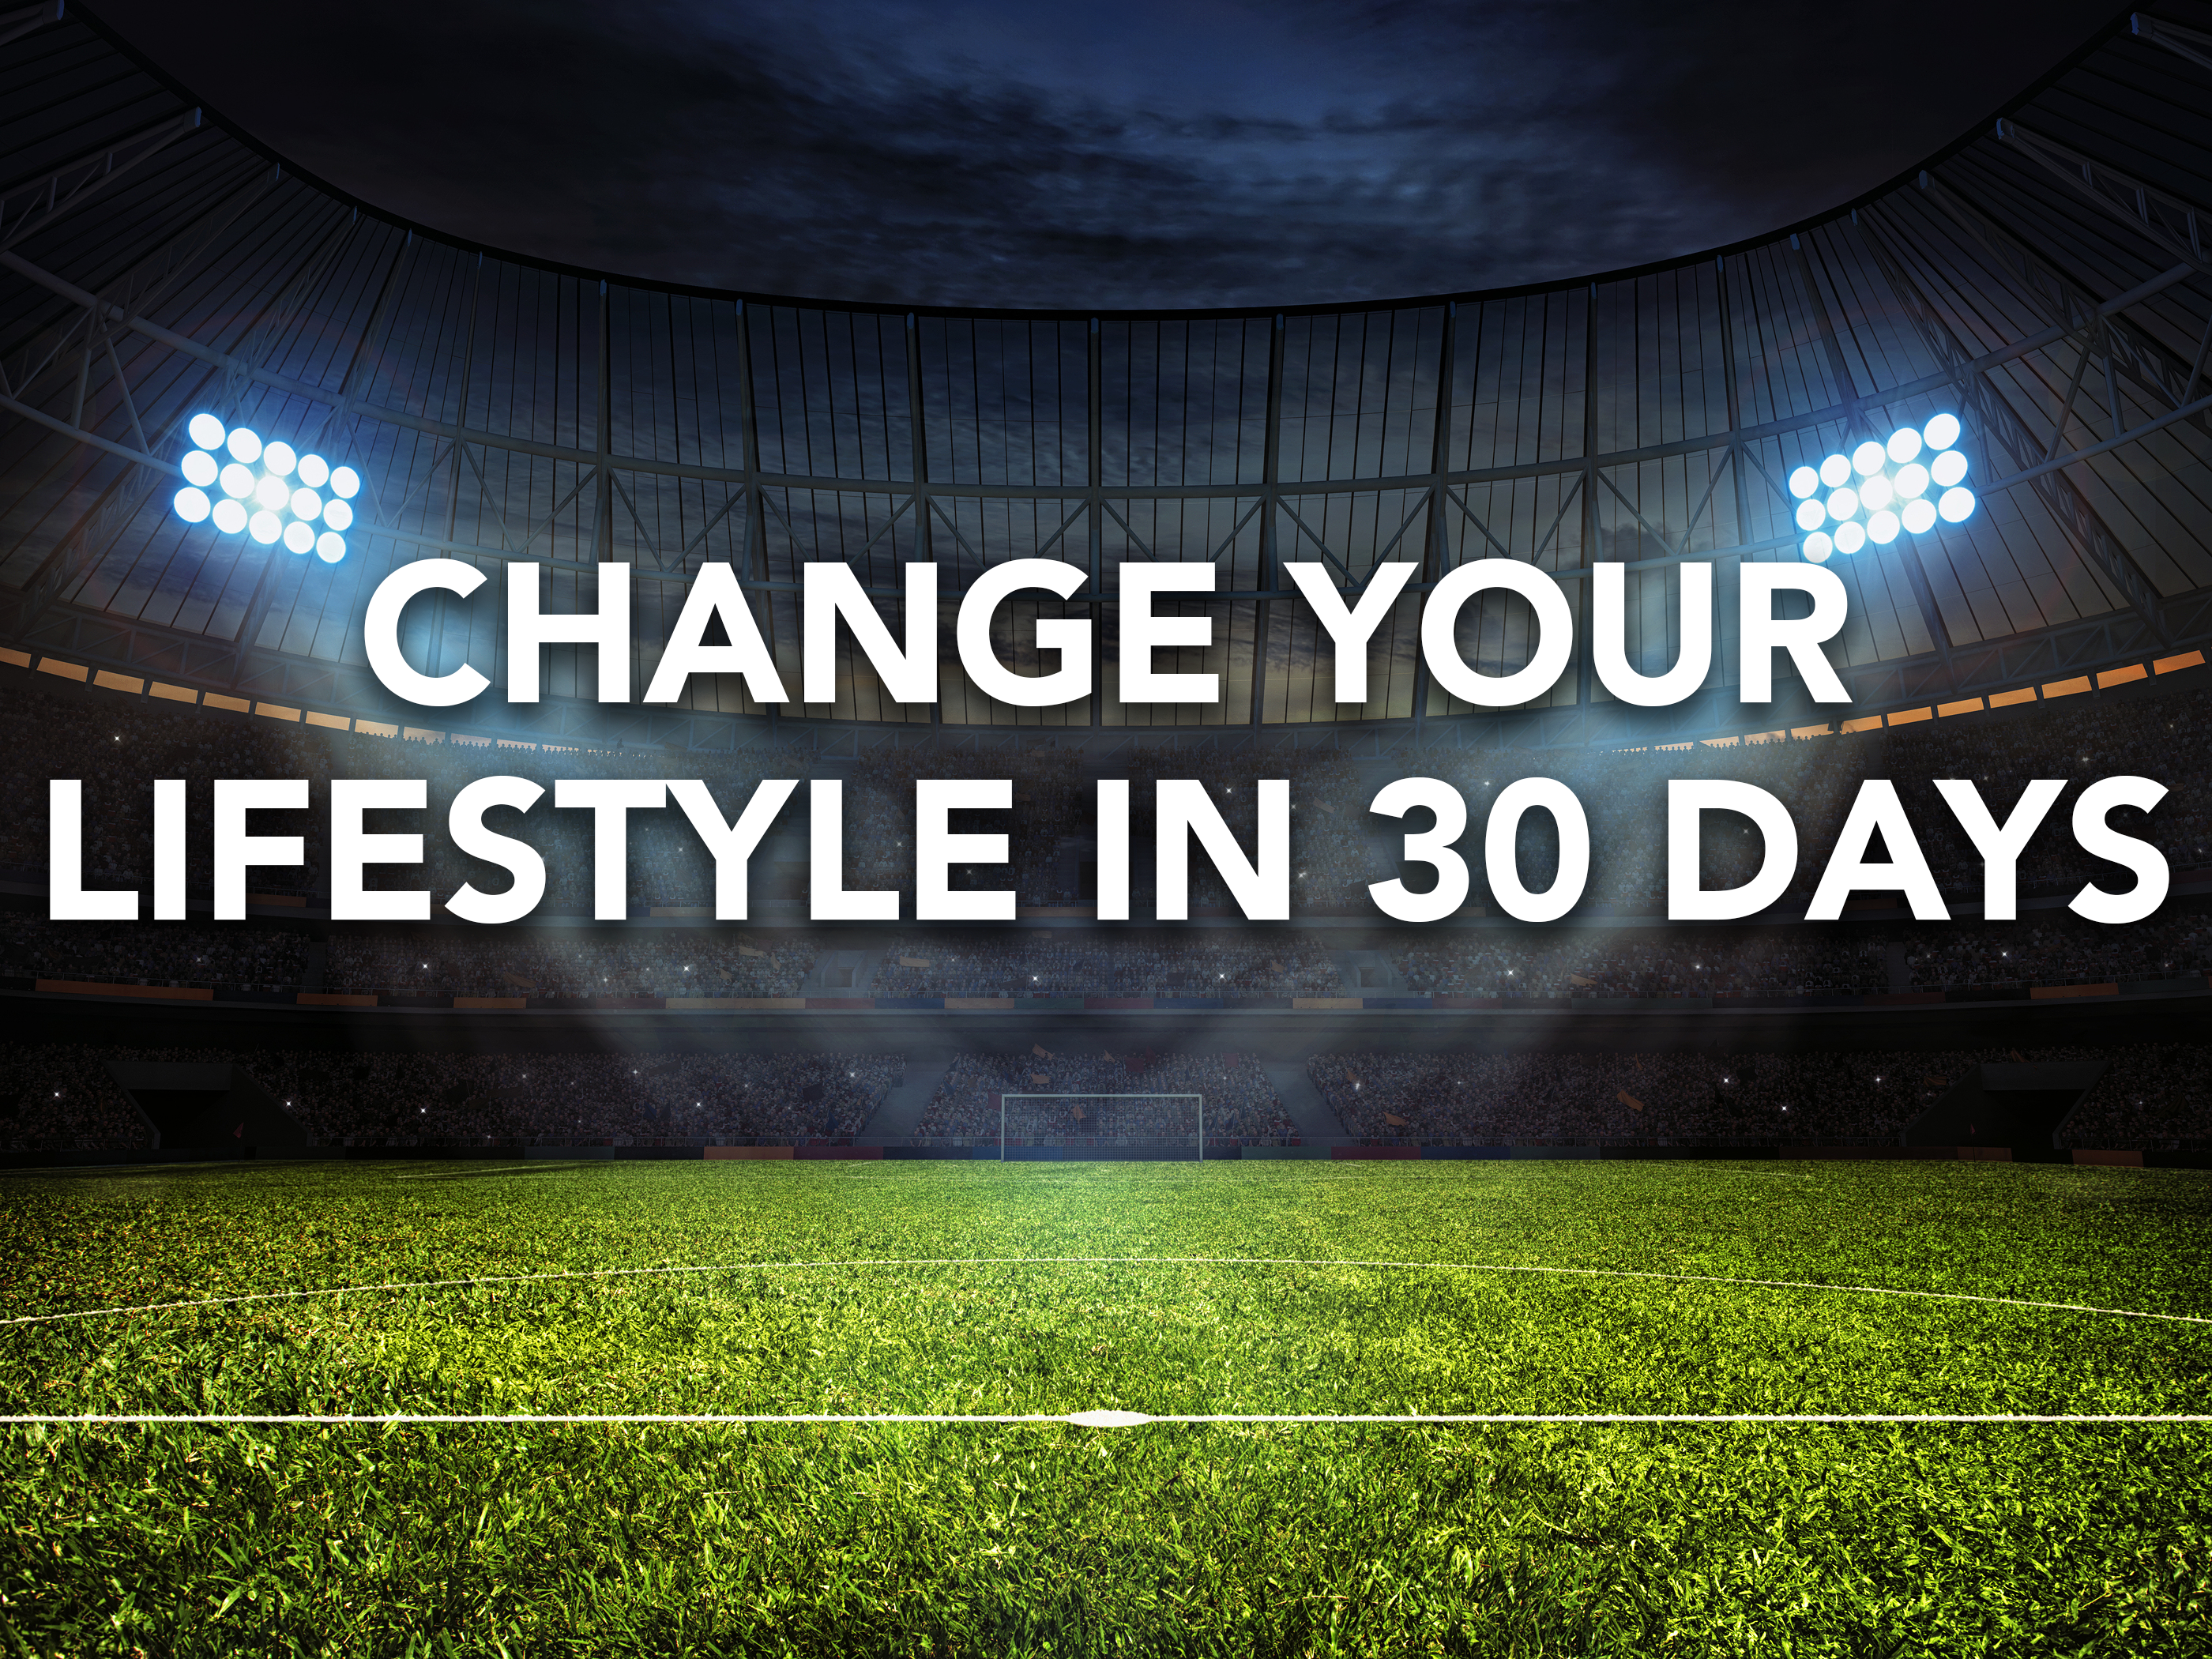 Change Your Lifestyle in 30 Days!